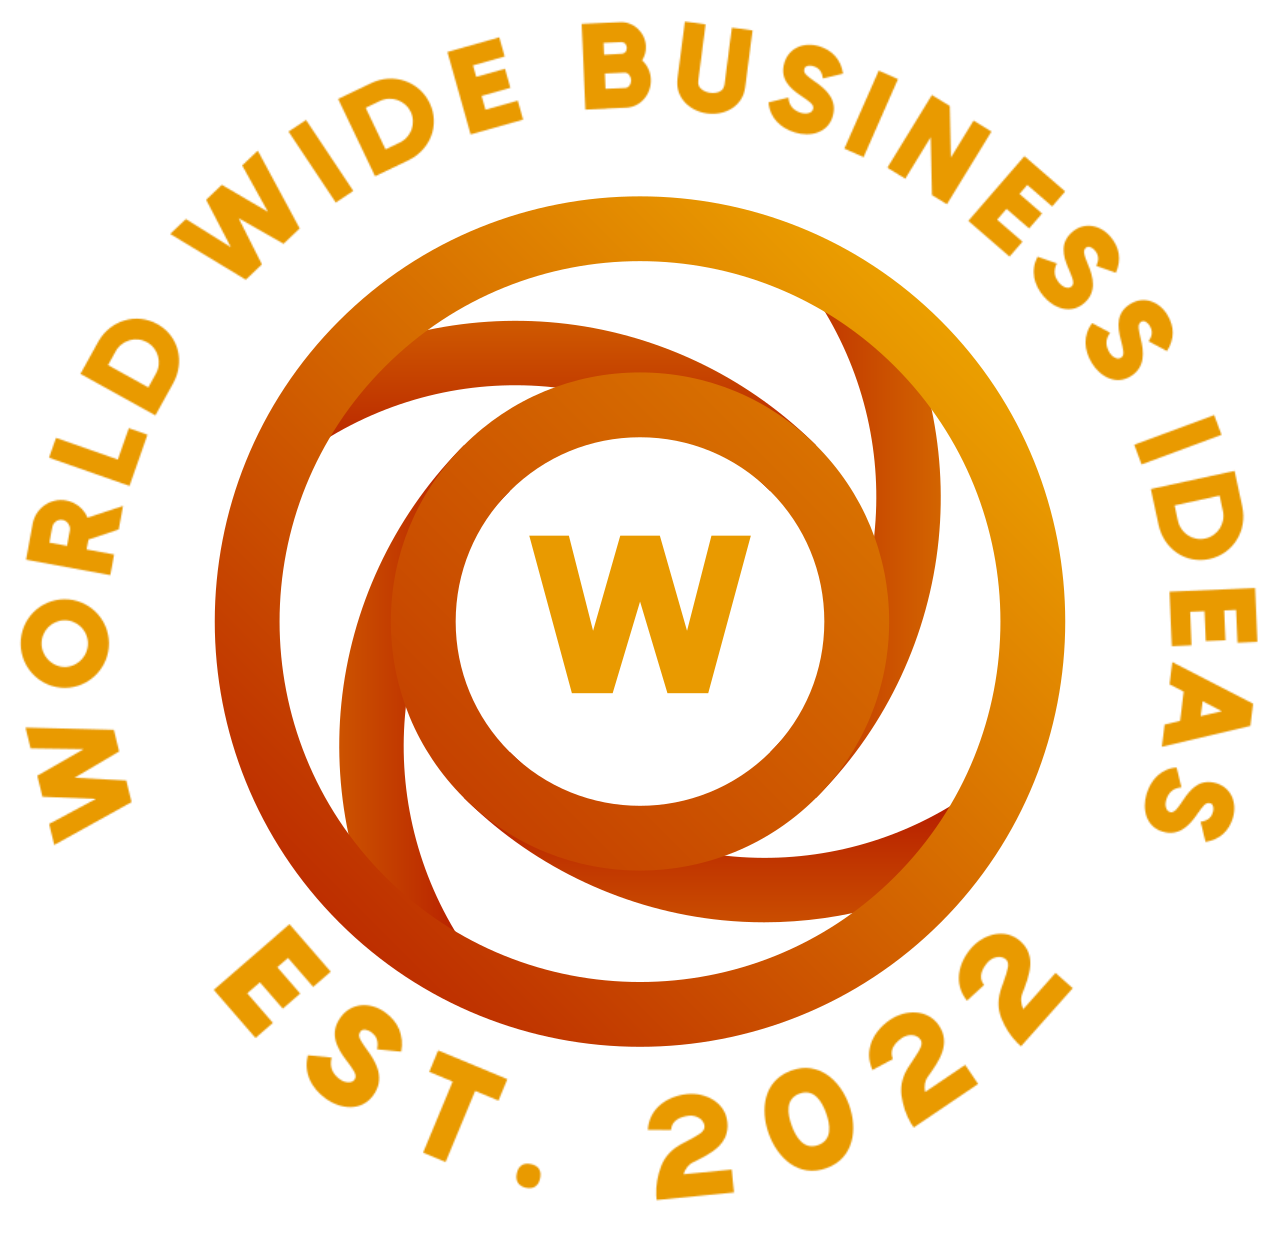 World Wide Business Ideas's web page